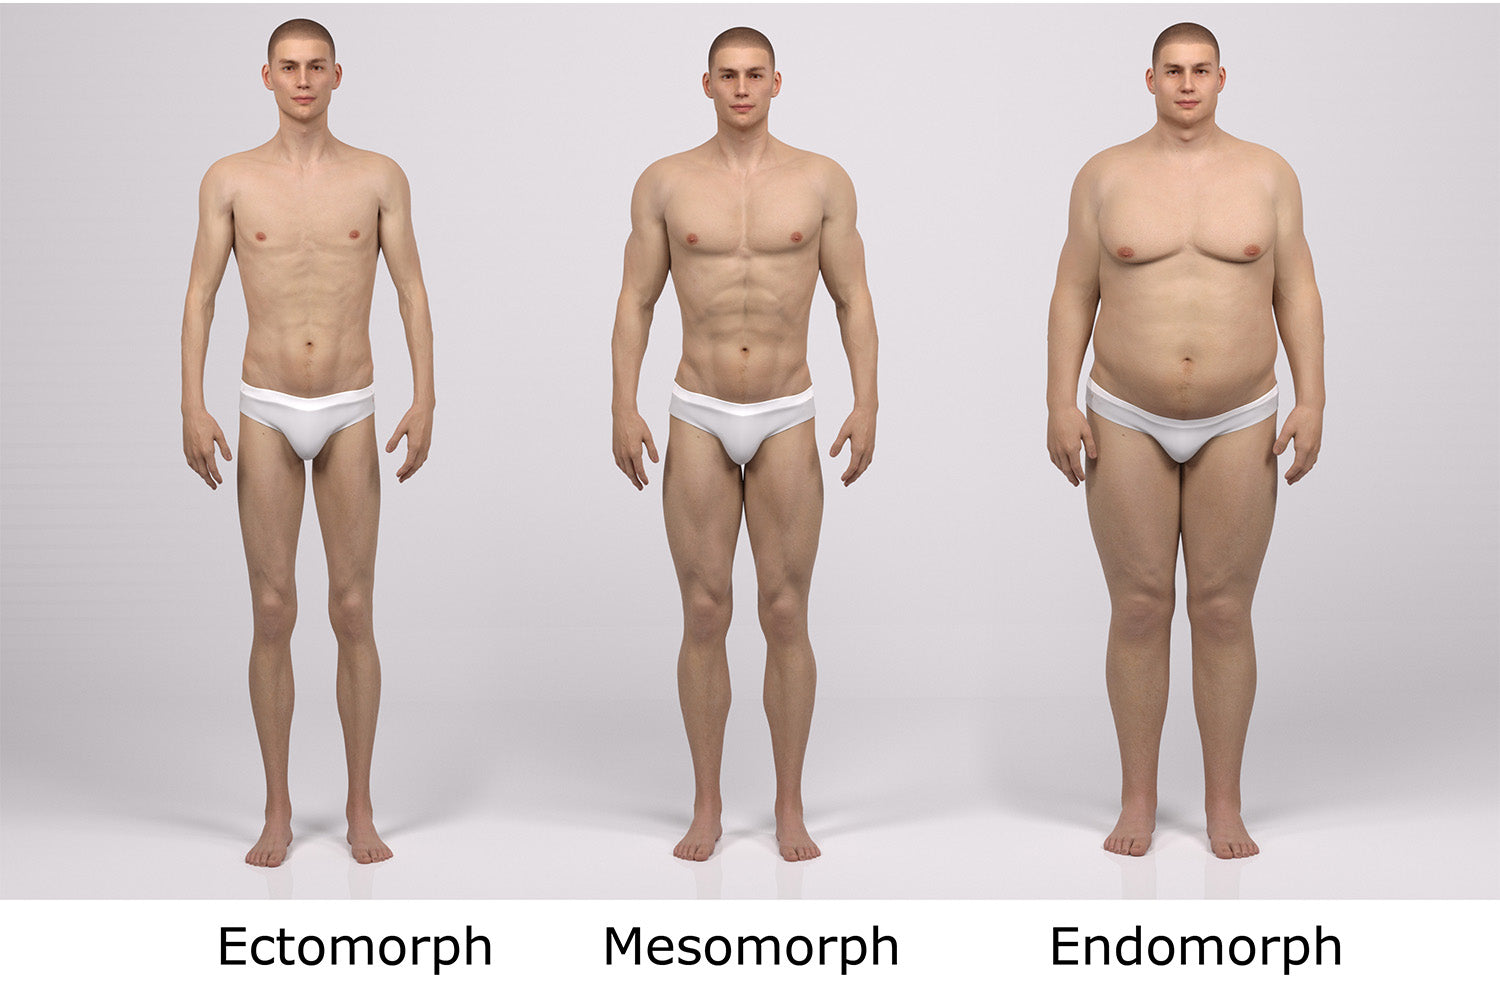 Which somatotype is characterised by broad shoulders, narrow waist